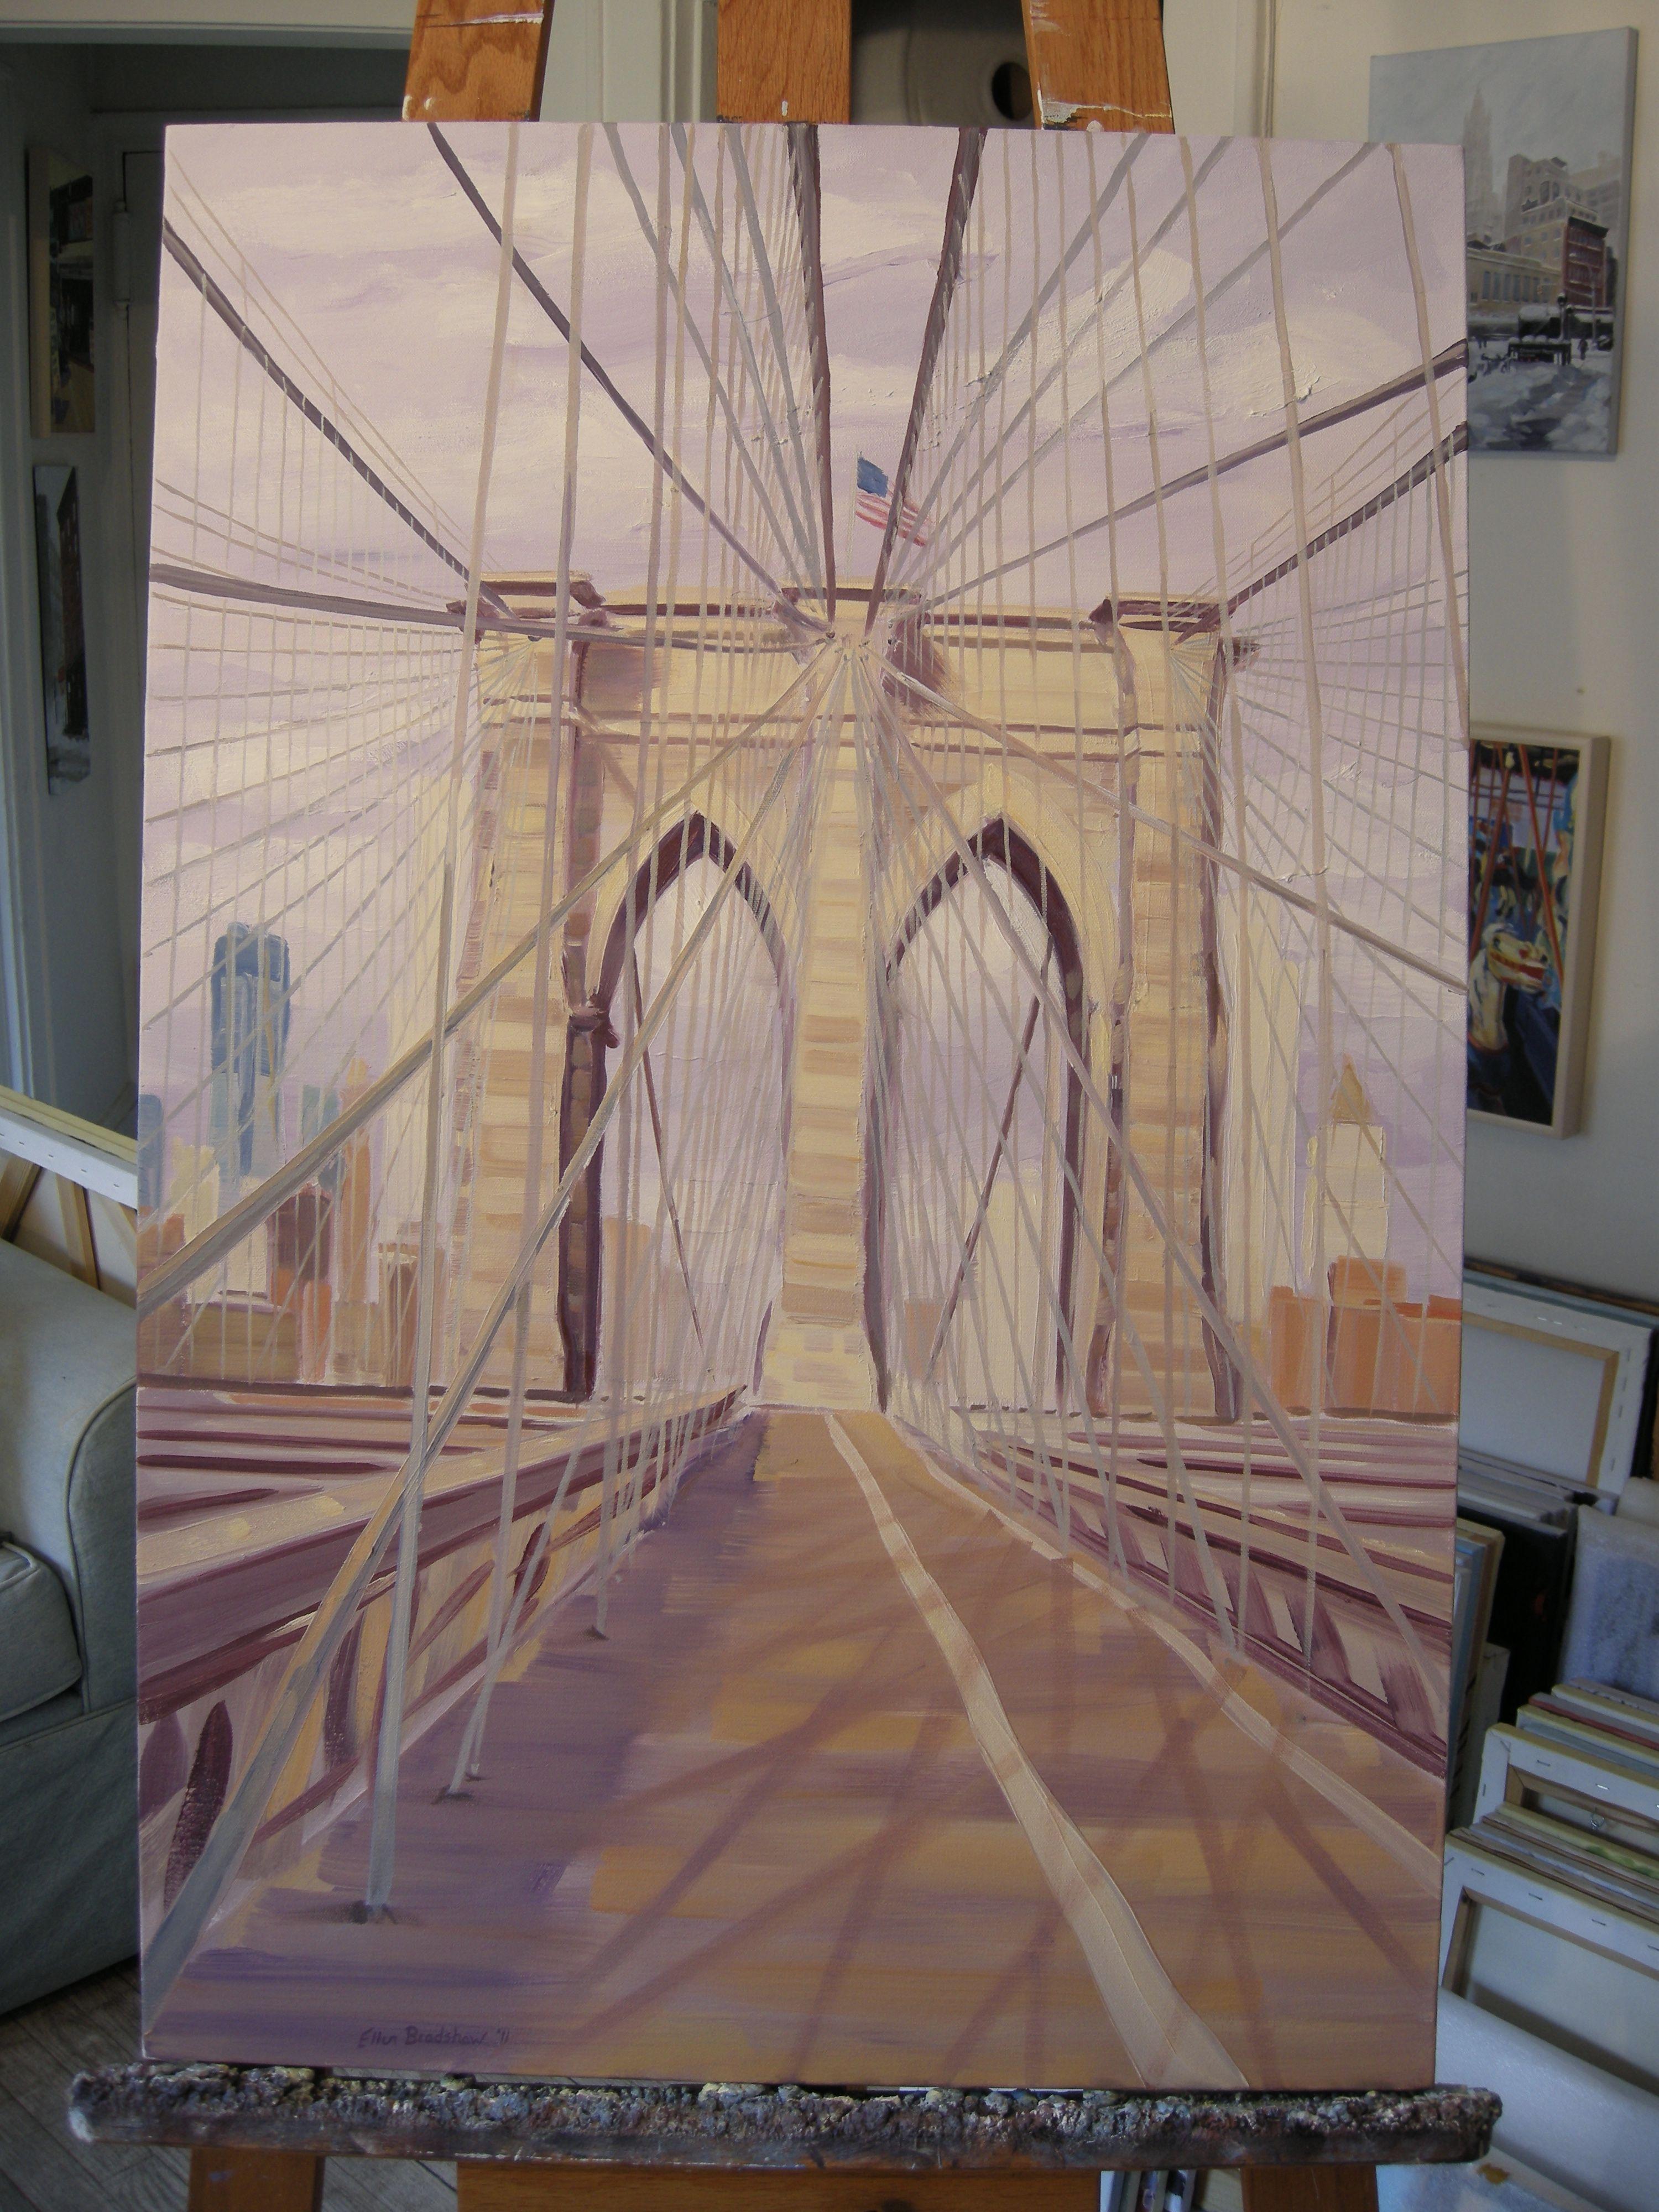 A walk across the Brooklyn Bridge towards Manhattan in full sun offered a dazzling crisscross of intricate cable work made even more beautiful through play of sun and shadow! :: Painting :: Realism :: This piece comes with an official certificate of